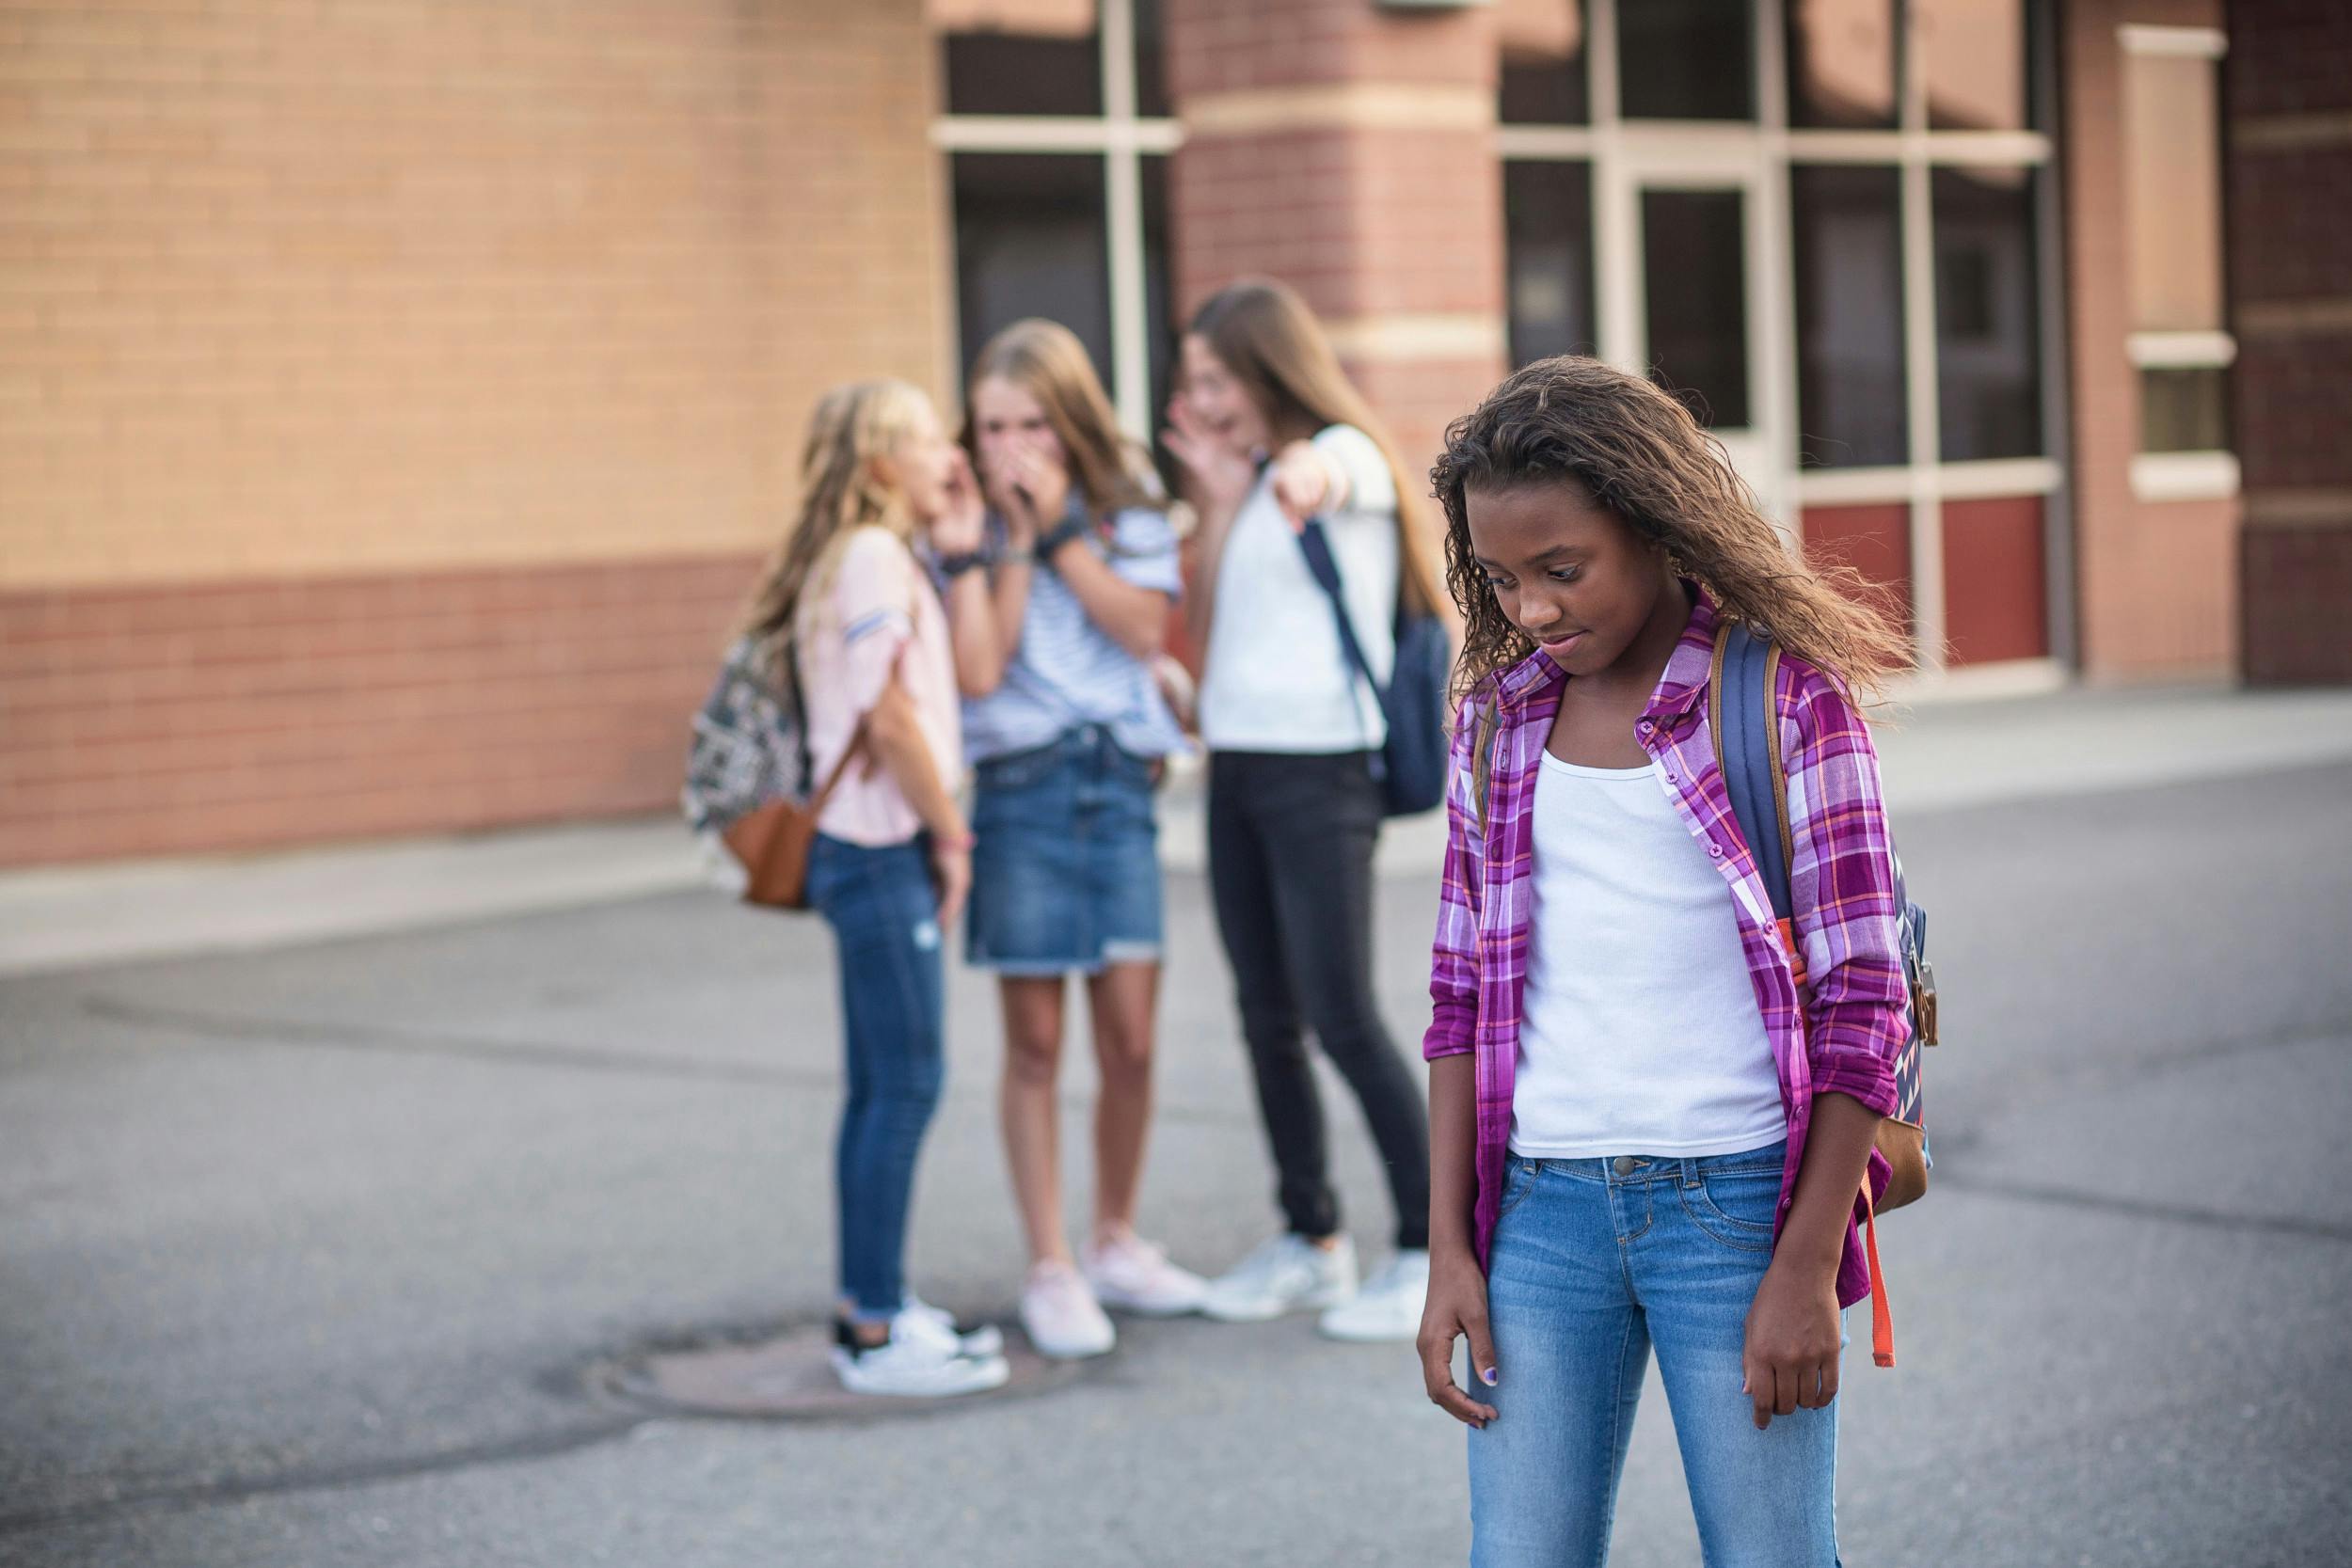 How Can Schools Combat the Covid-19 Slide? Bullying Prevention Is the Best Place To Start